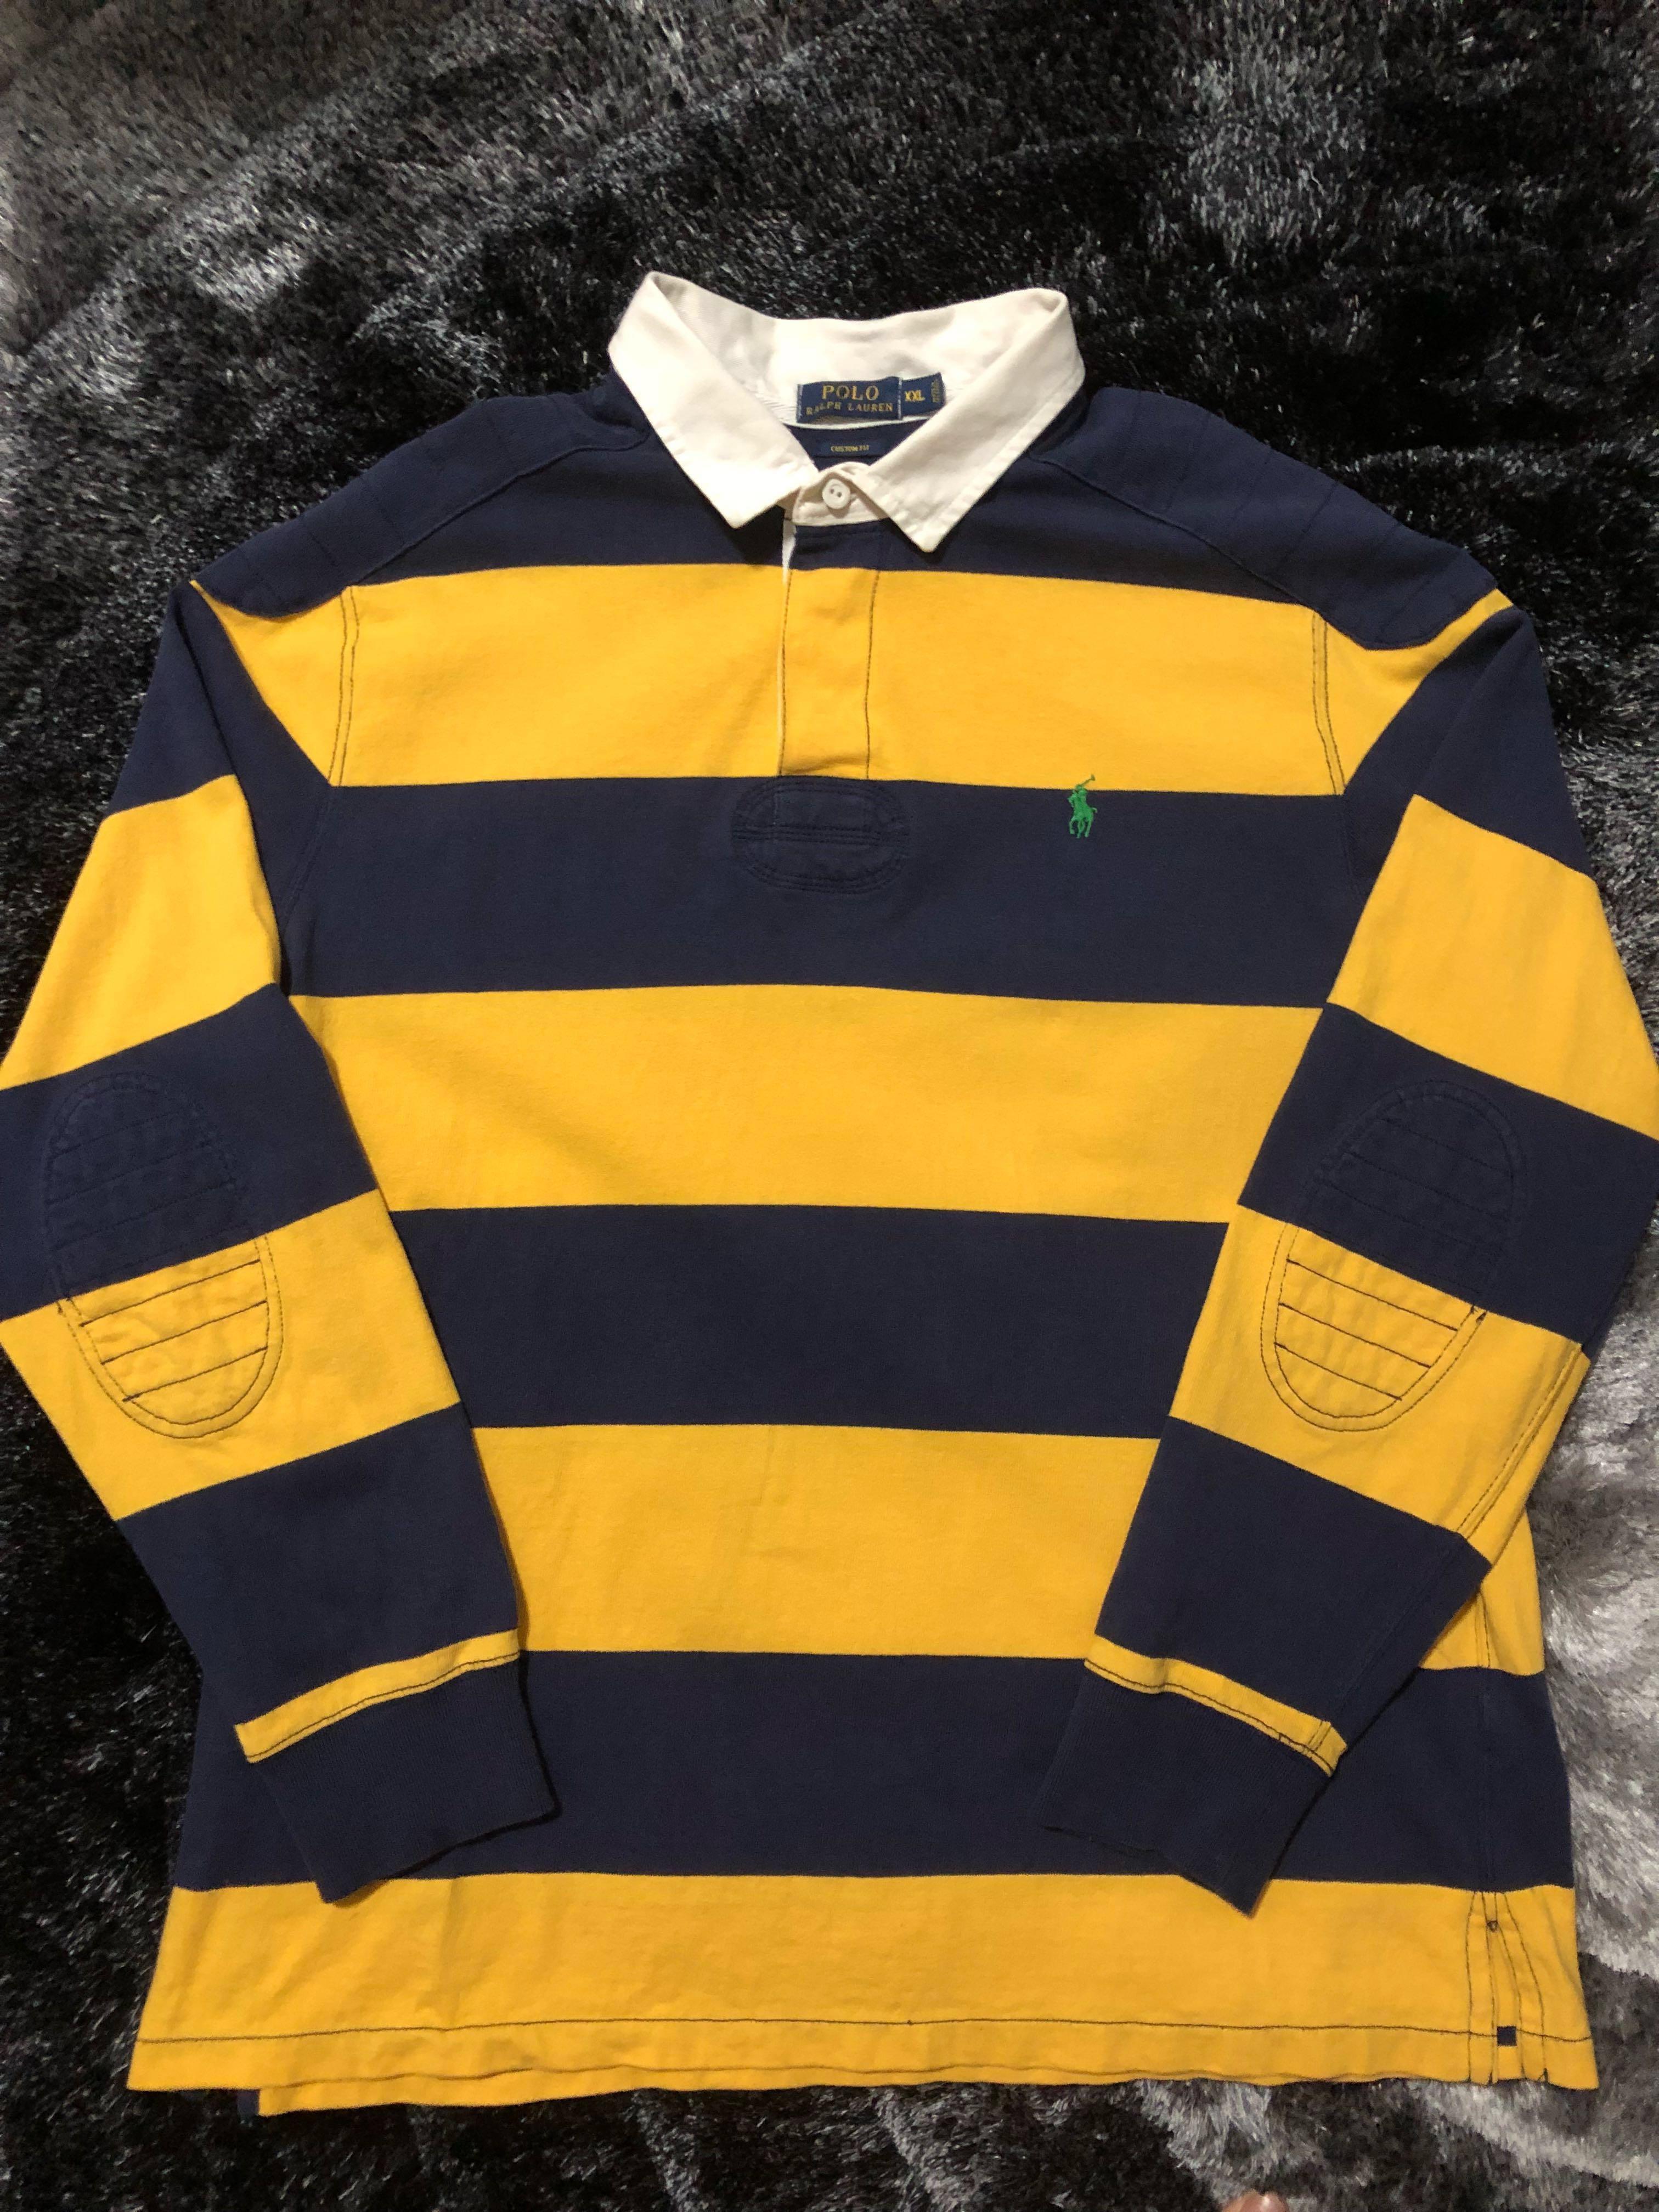 Polo Rugby Vintage Top Sellers, 51% OFF | www.ingeniovirtual.com